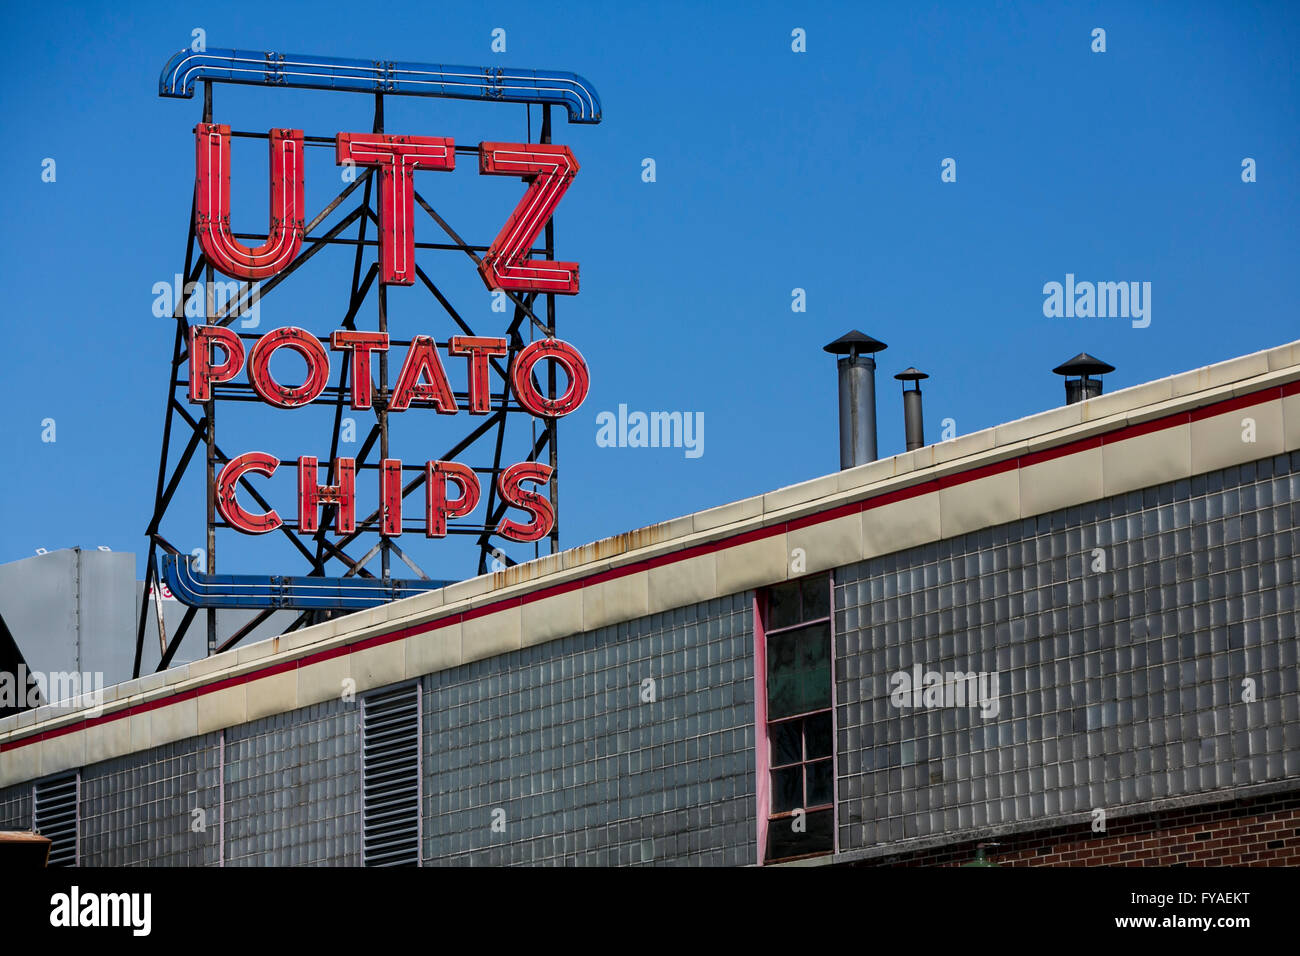 A logo sign outside of a facility occupied by Utz Quality Foods, Inc., in Hanover, Pennsylvania on April 17, 2016. Stock Photo